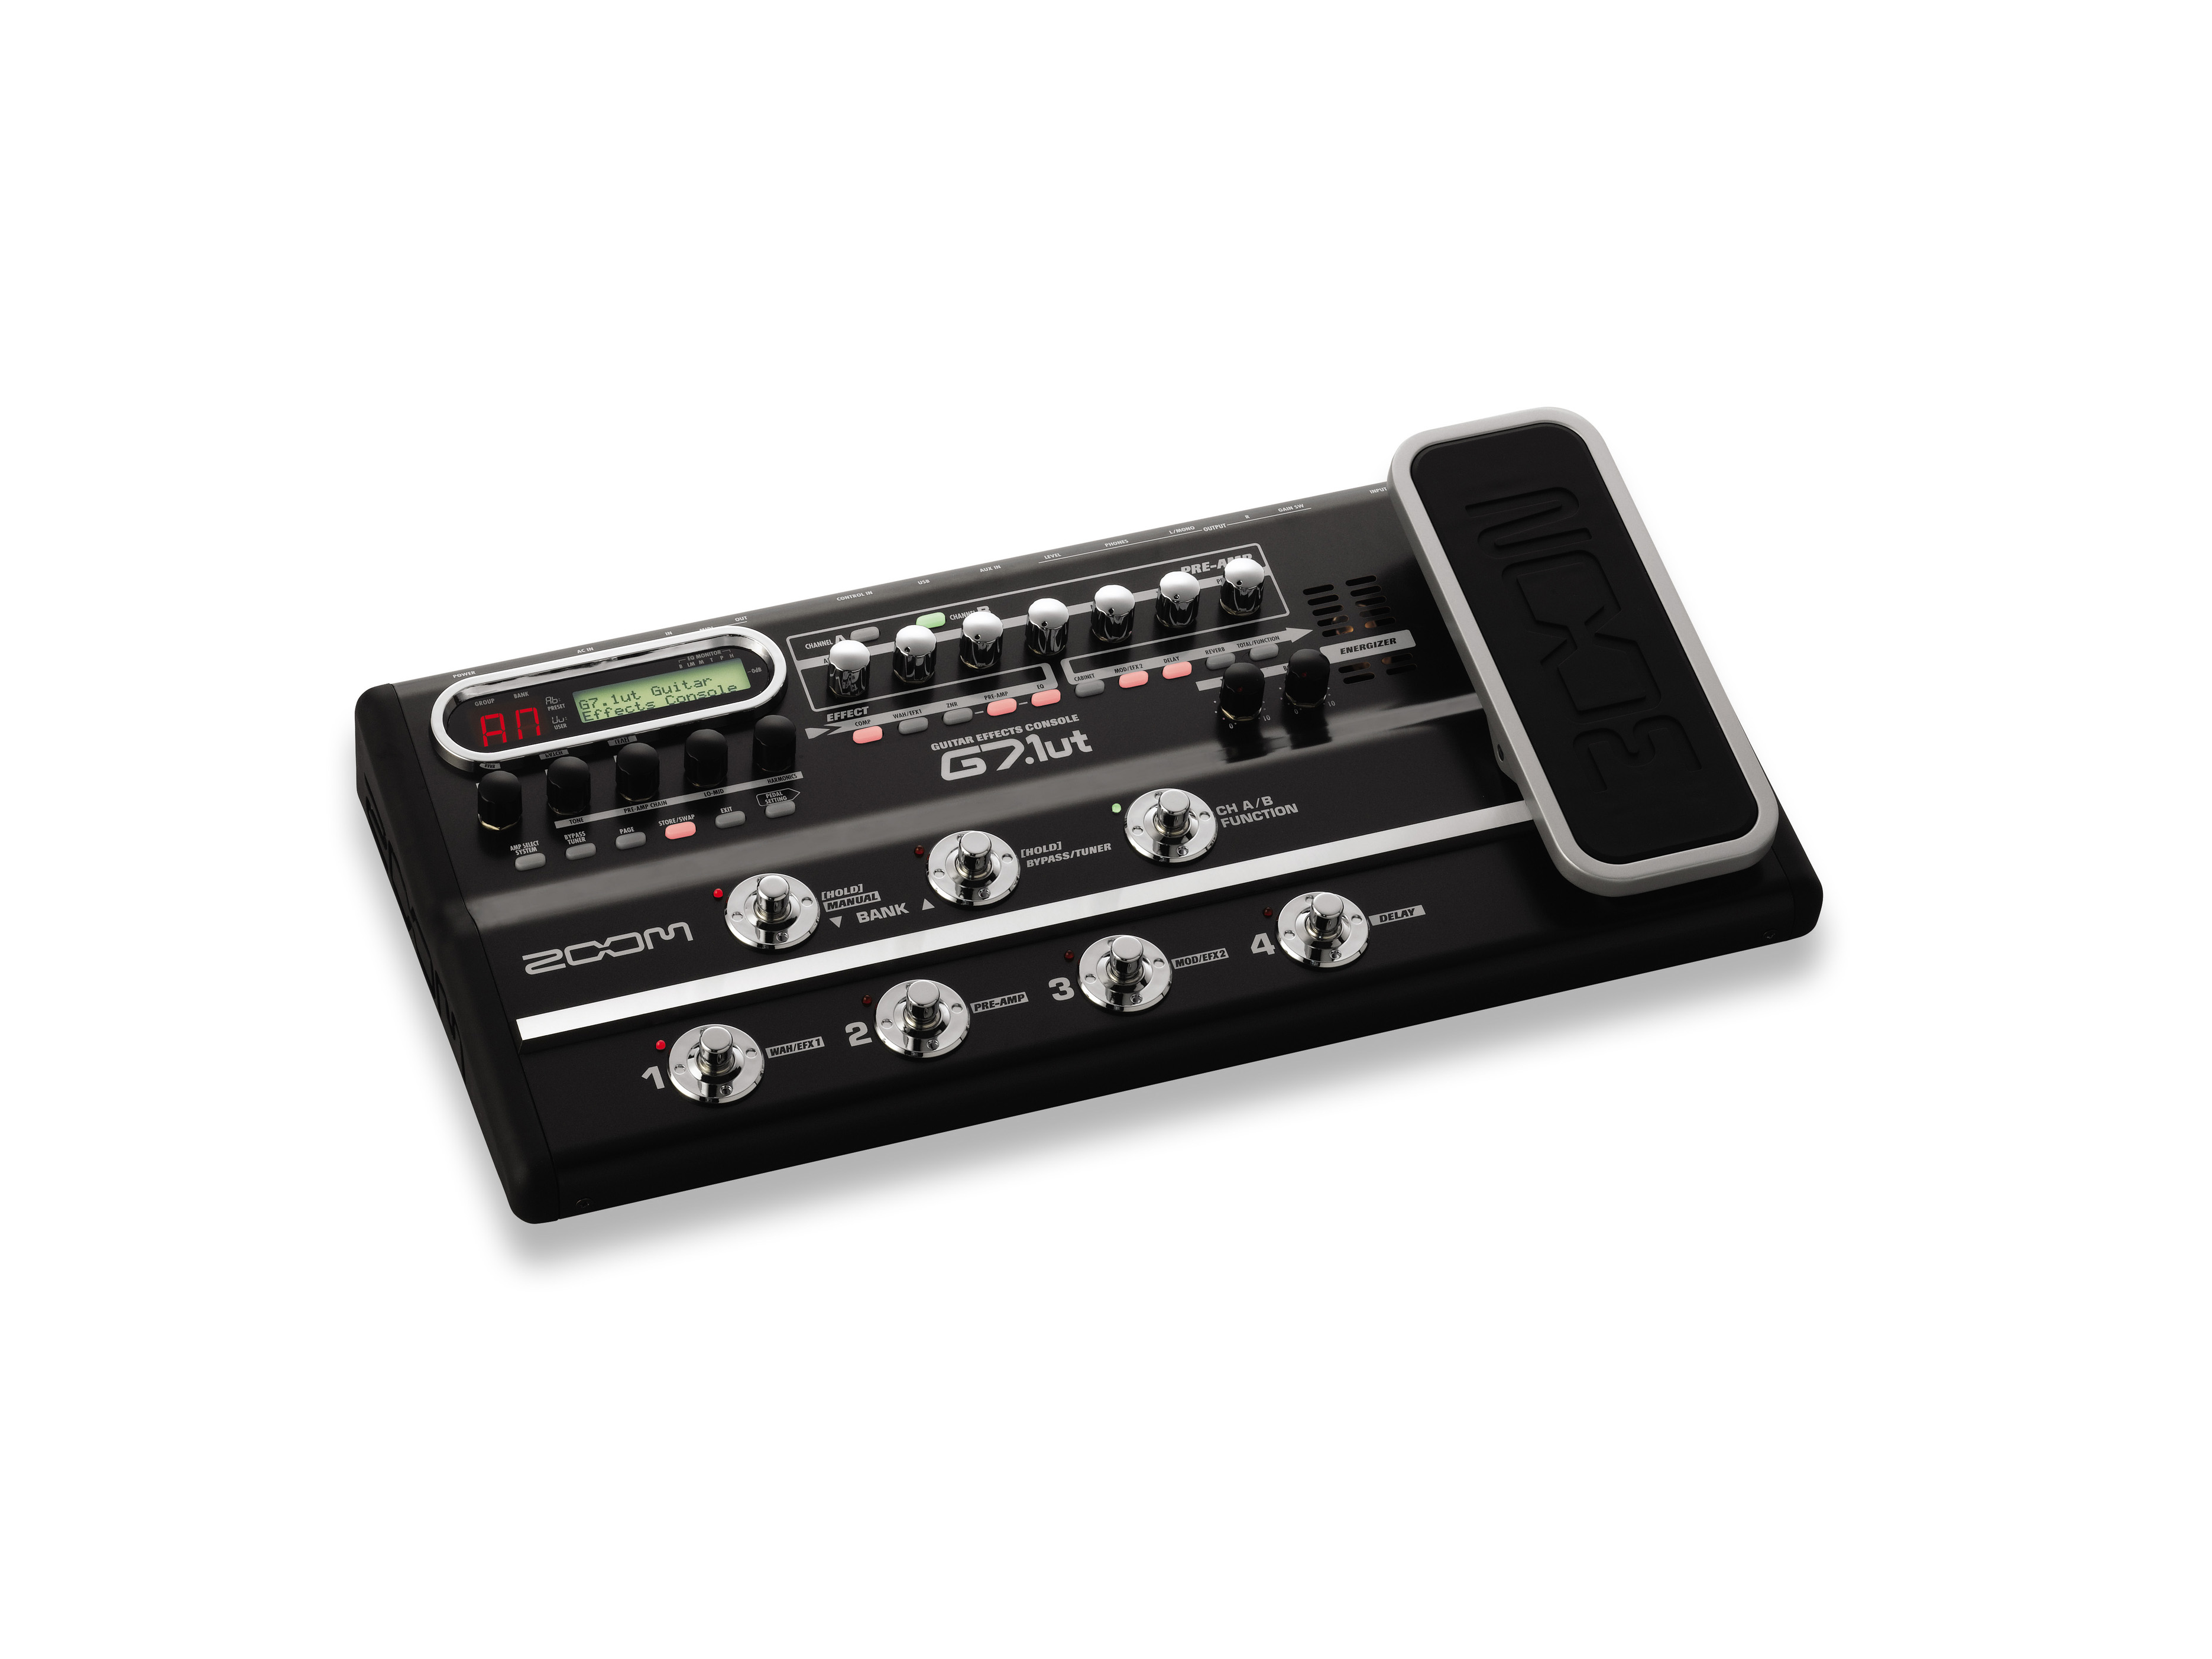 G7.1ut Guitar Effects Console | Zoom